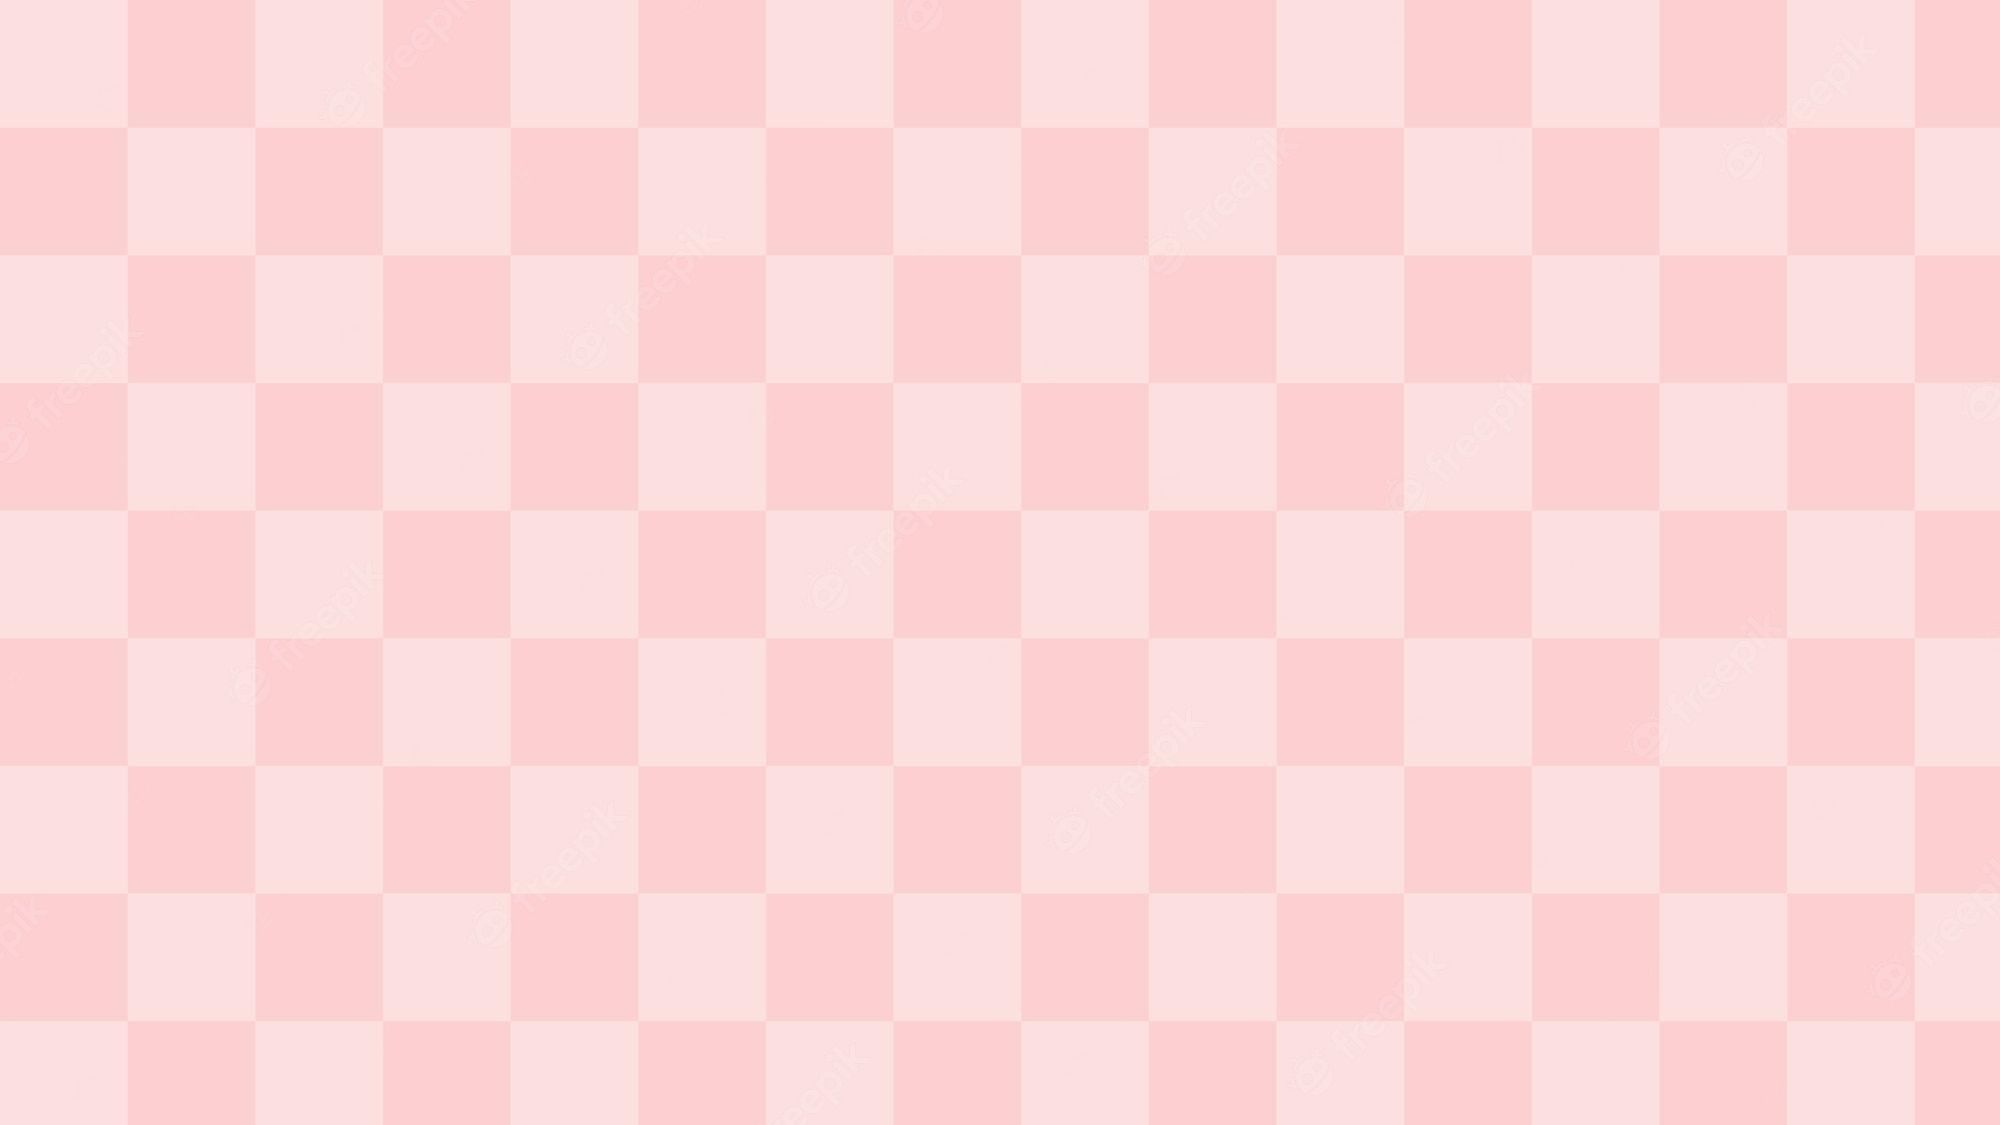 A pink checkered background with white squares - Pastel pink, pastel